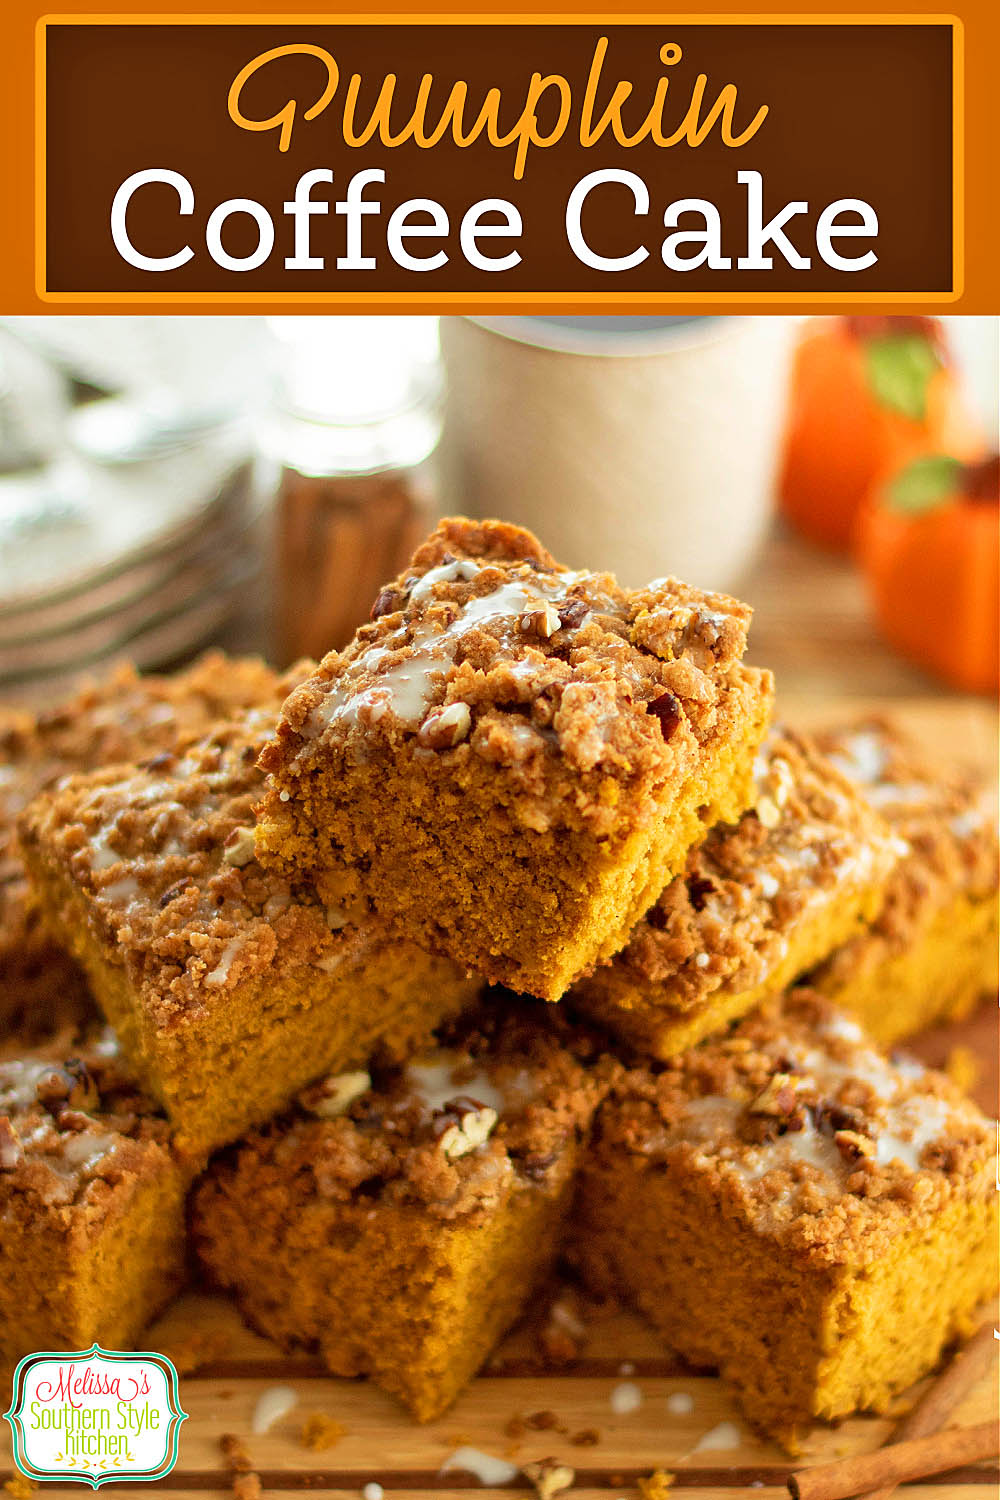 Treat the family to this Pumpkin Coffee Cake topped with a buttery crisp pecan and toffee filled streusel topping. #pumpkin #pumpkinrecipes #pumpkincake #coffeecake #pumpkincoffeecake #cakerecipes #fallbaking #brunchrecipes via @melissasssk